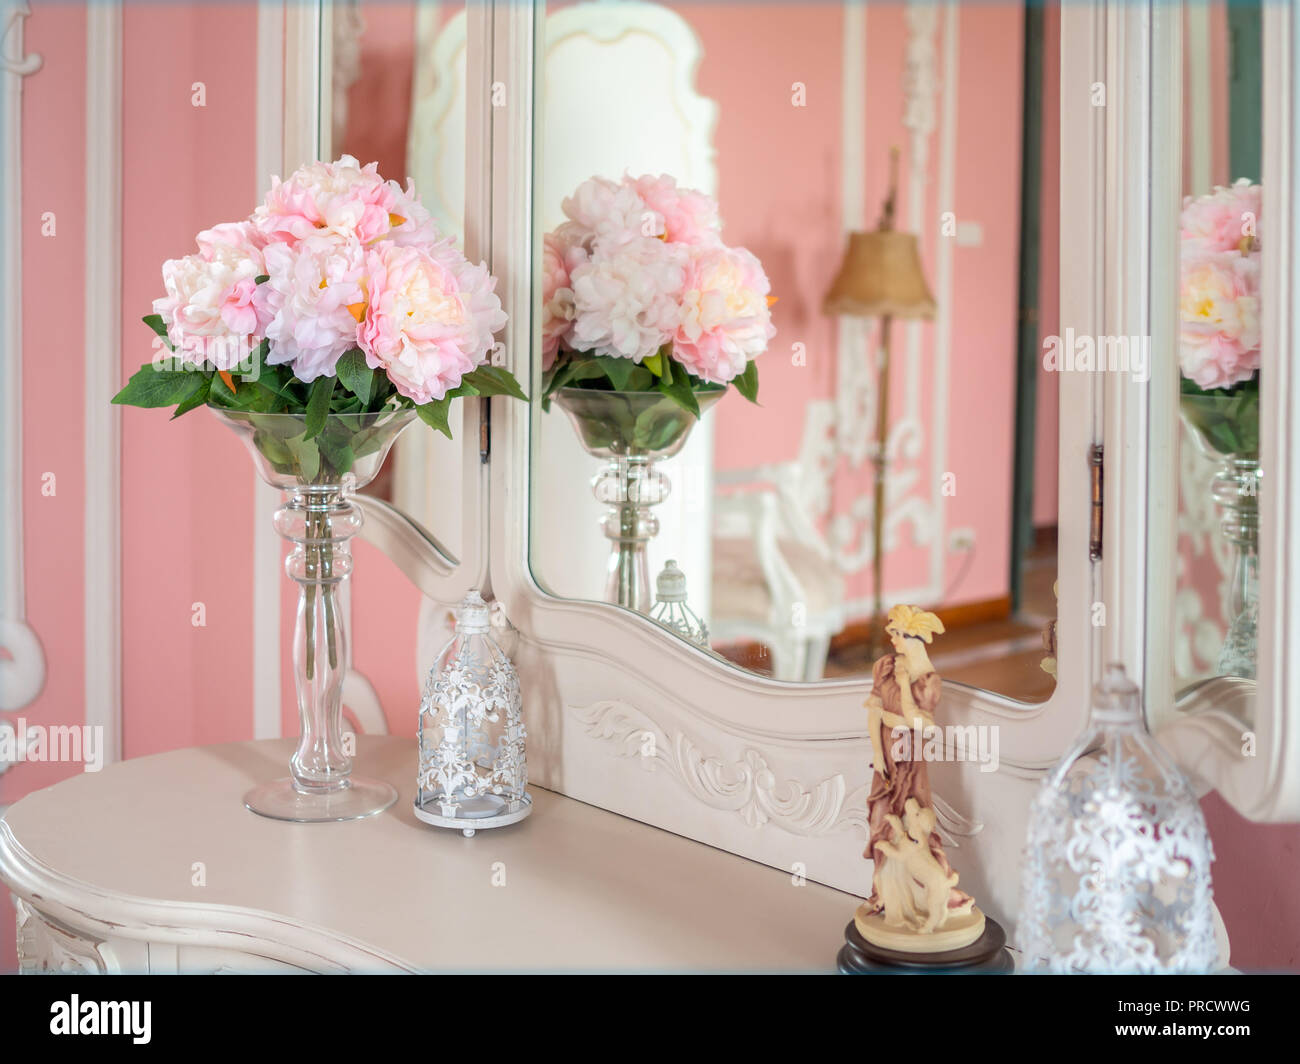 Bouquet of pink flowers in glass vase on white boudoir table and sweet pink room. Vintage decoration style. Stock Photo